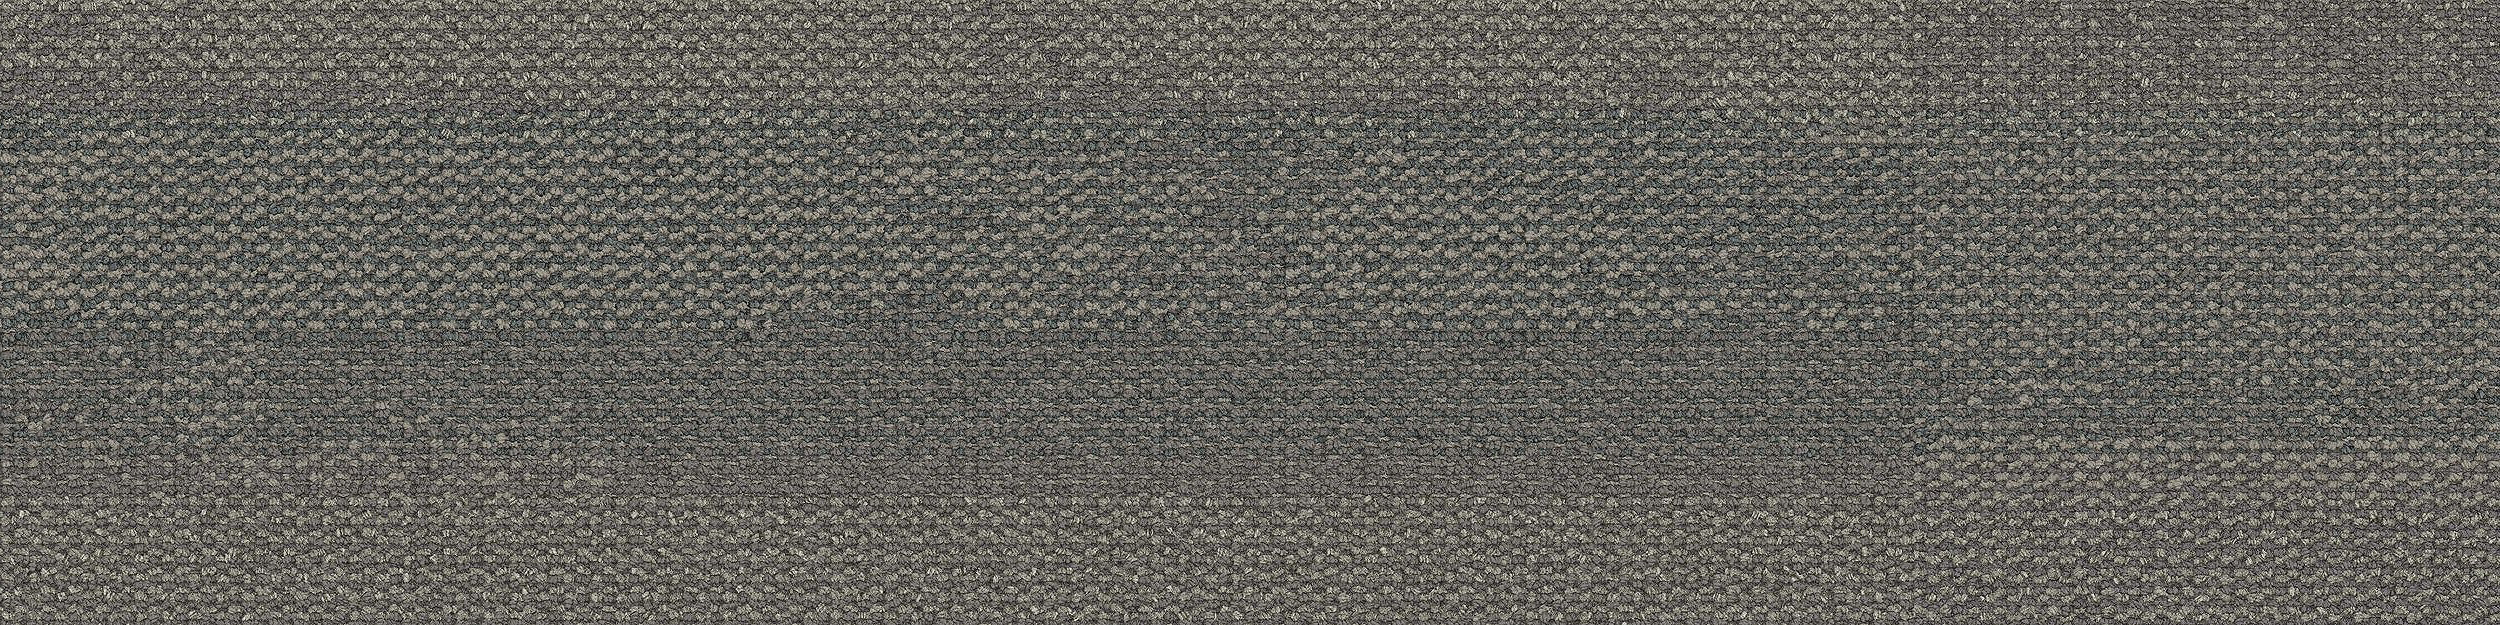 Naturally Weathered Carpet Tile In Greystone imagen número 10